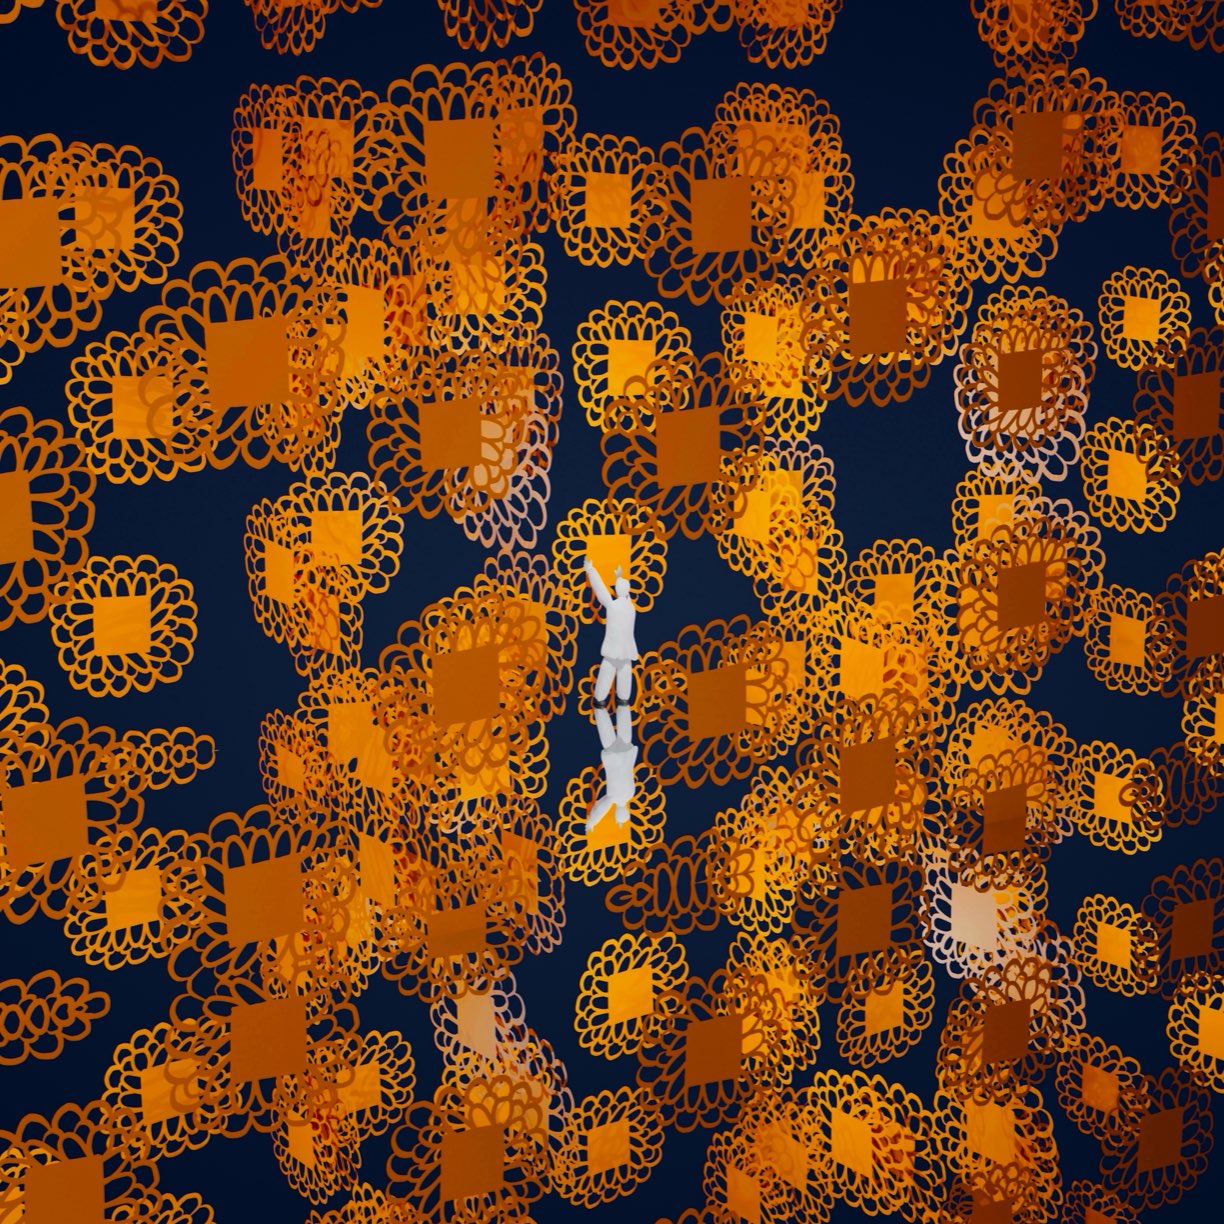 New Graphics Flower Pixel Created by Atsushigraph